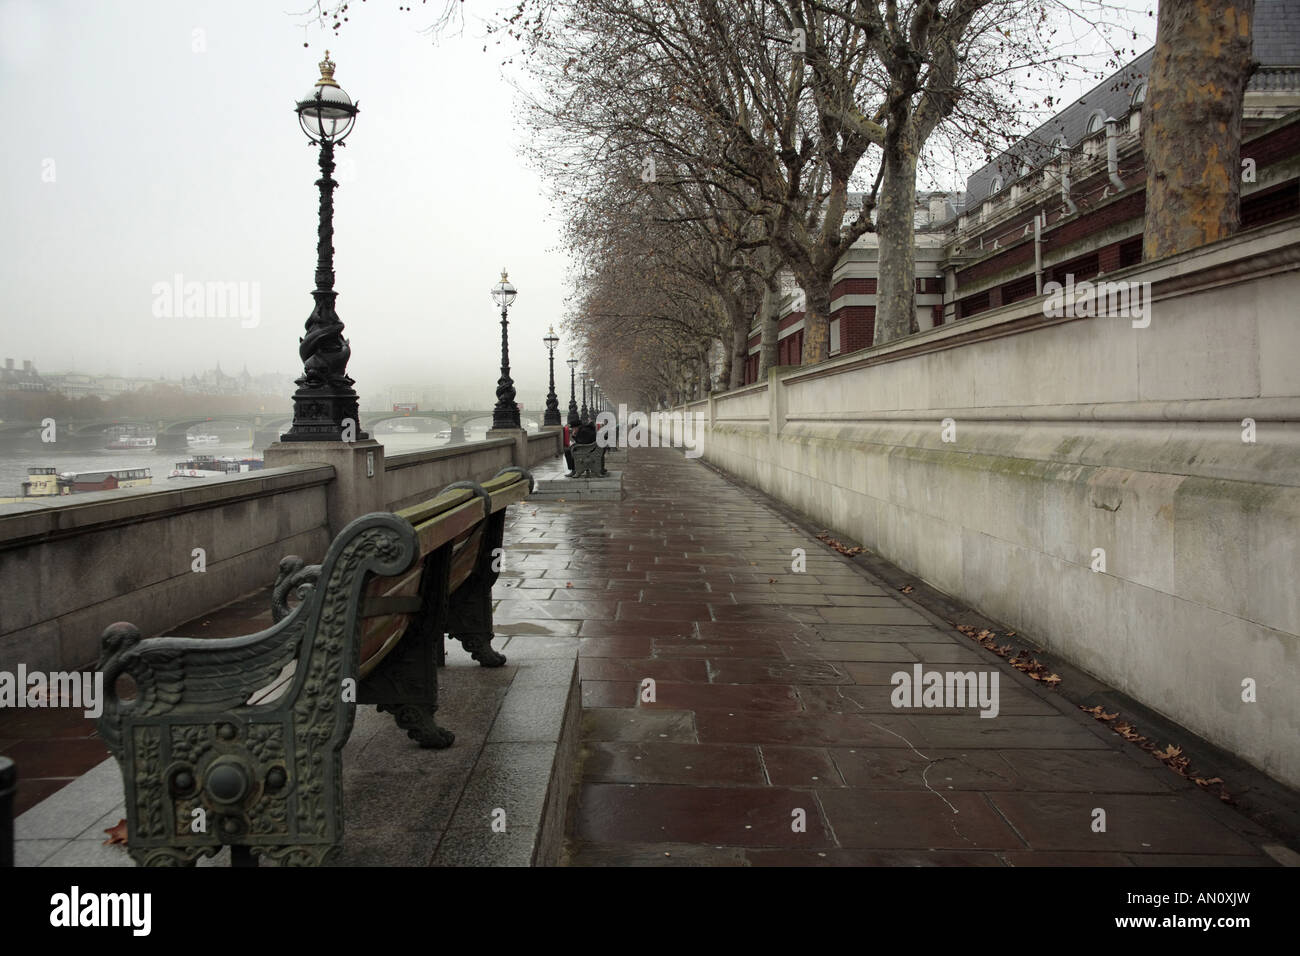 The Thames Embankment on a wet day, Stock Photo